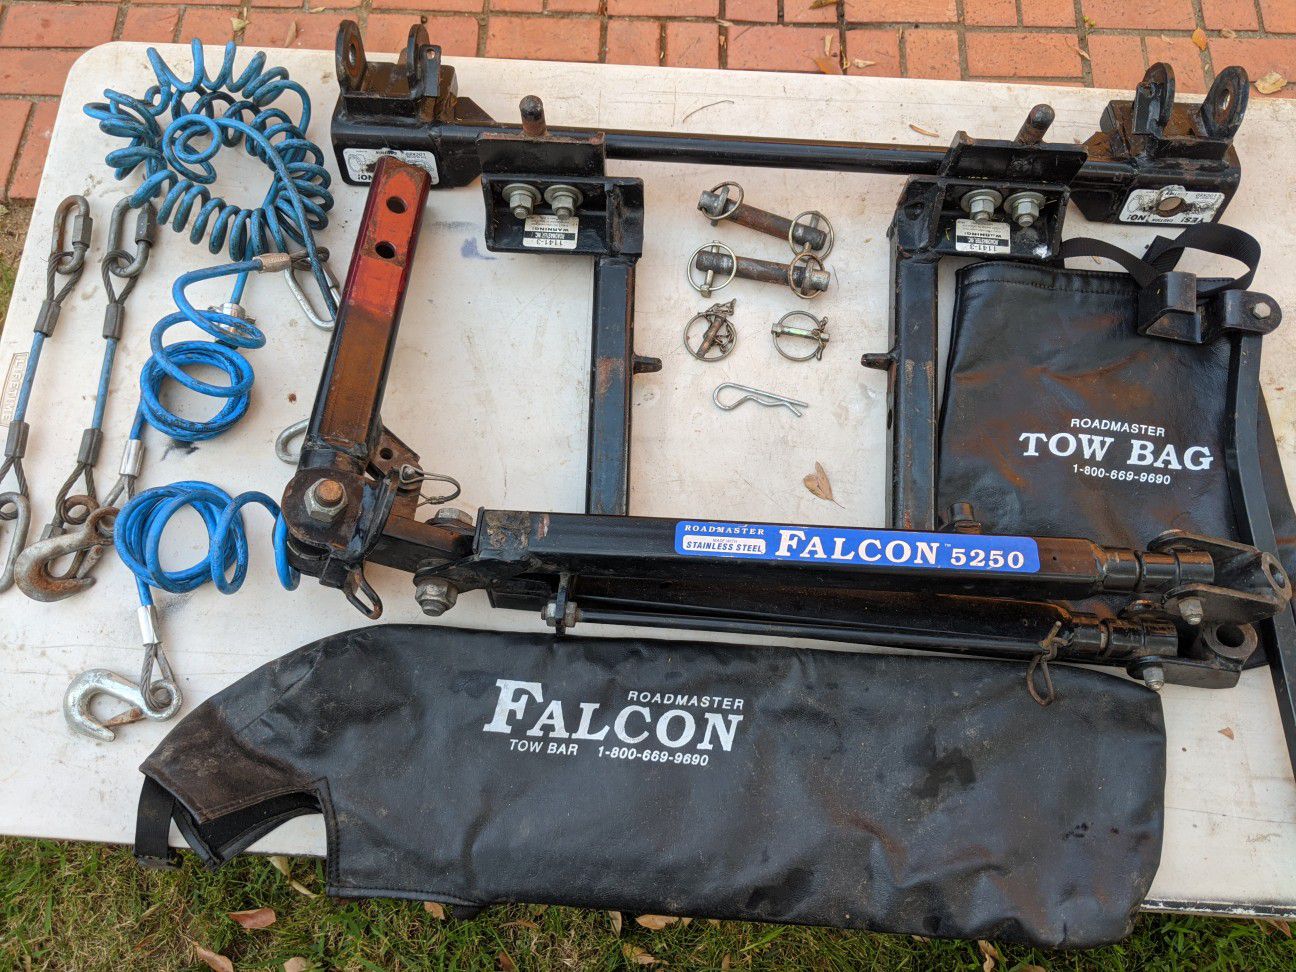 Falcon 5250 towbar for flat towing vehicles